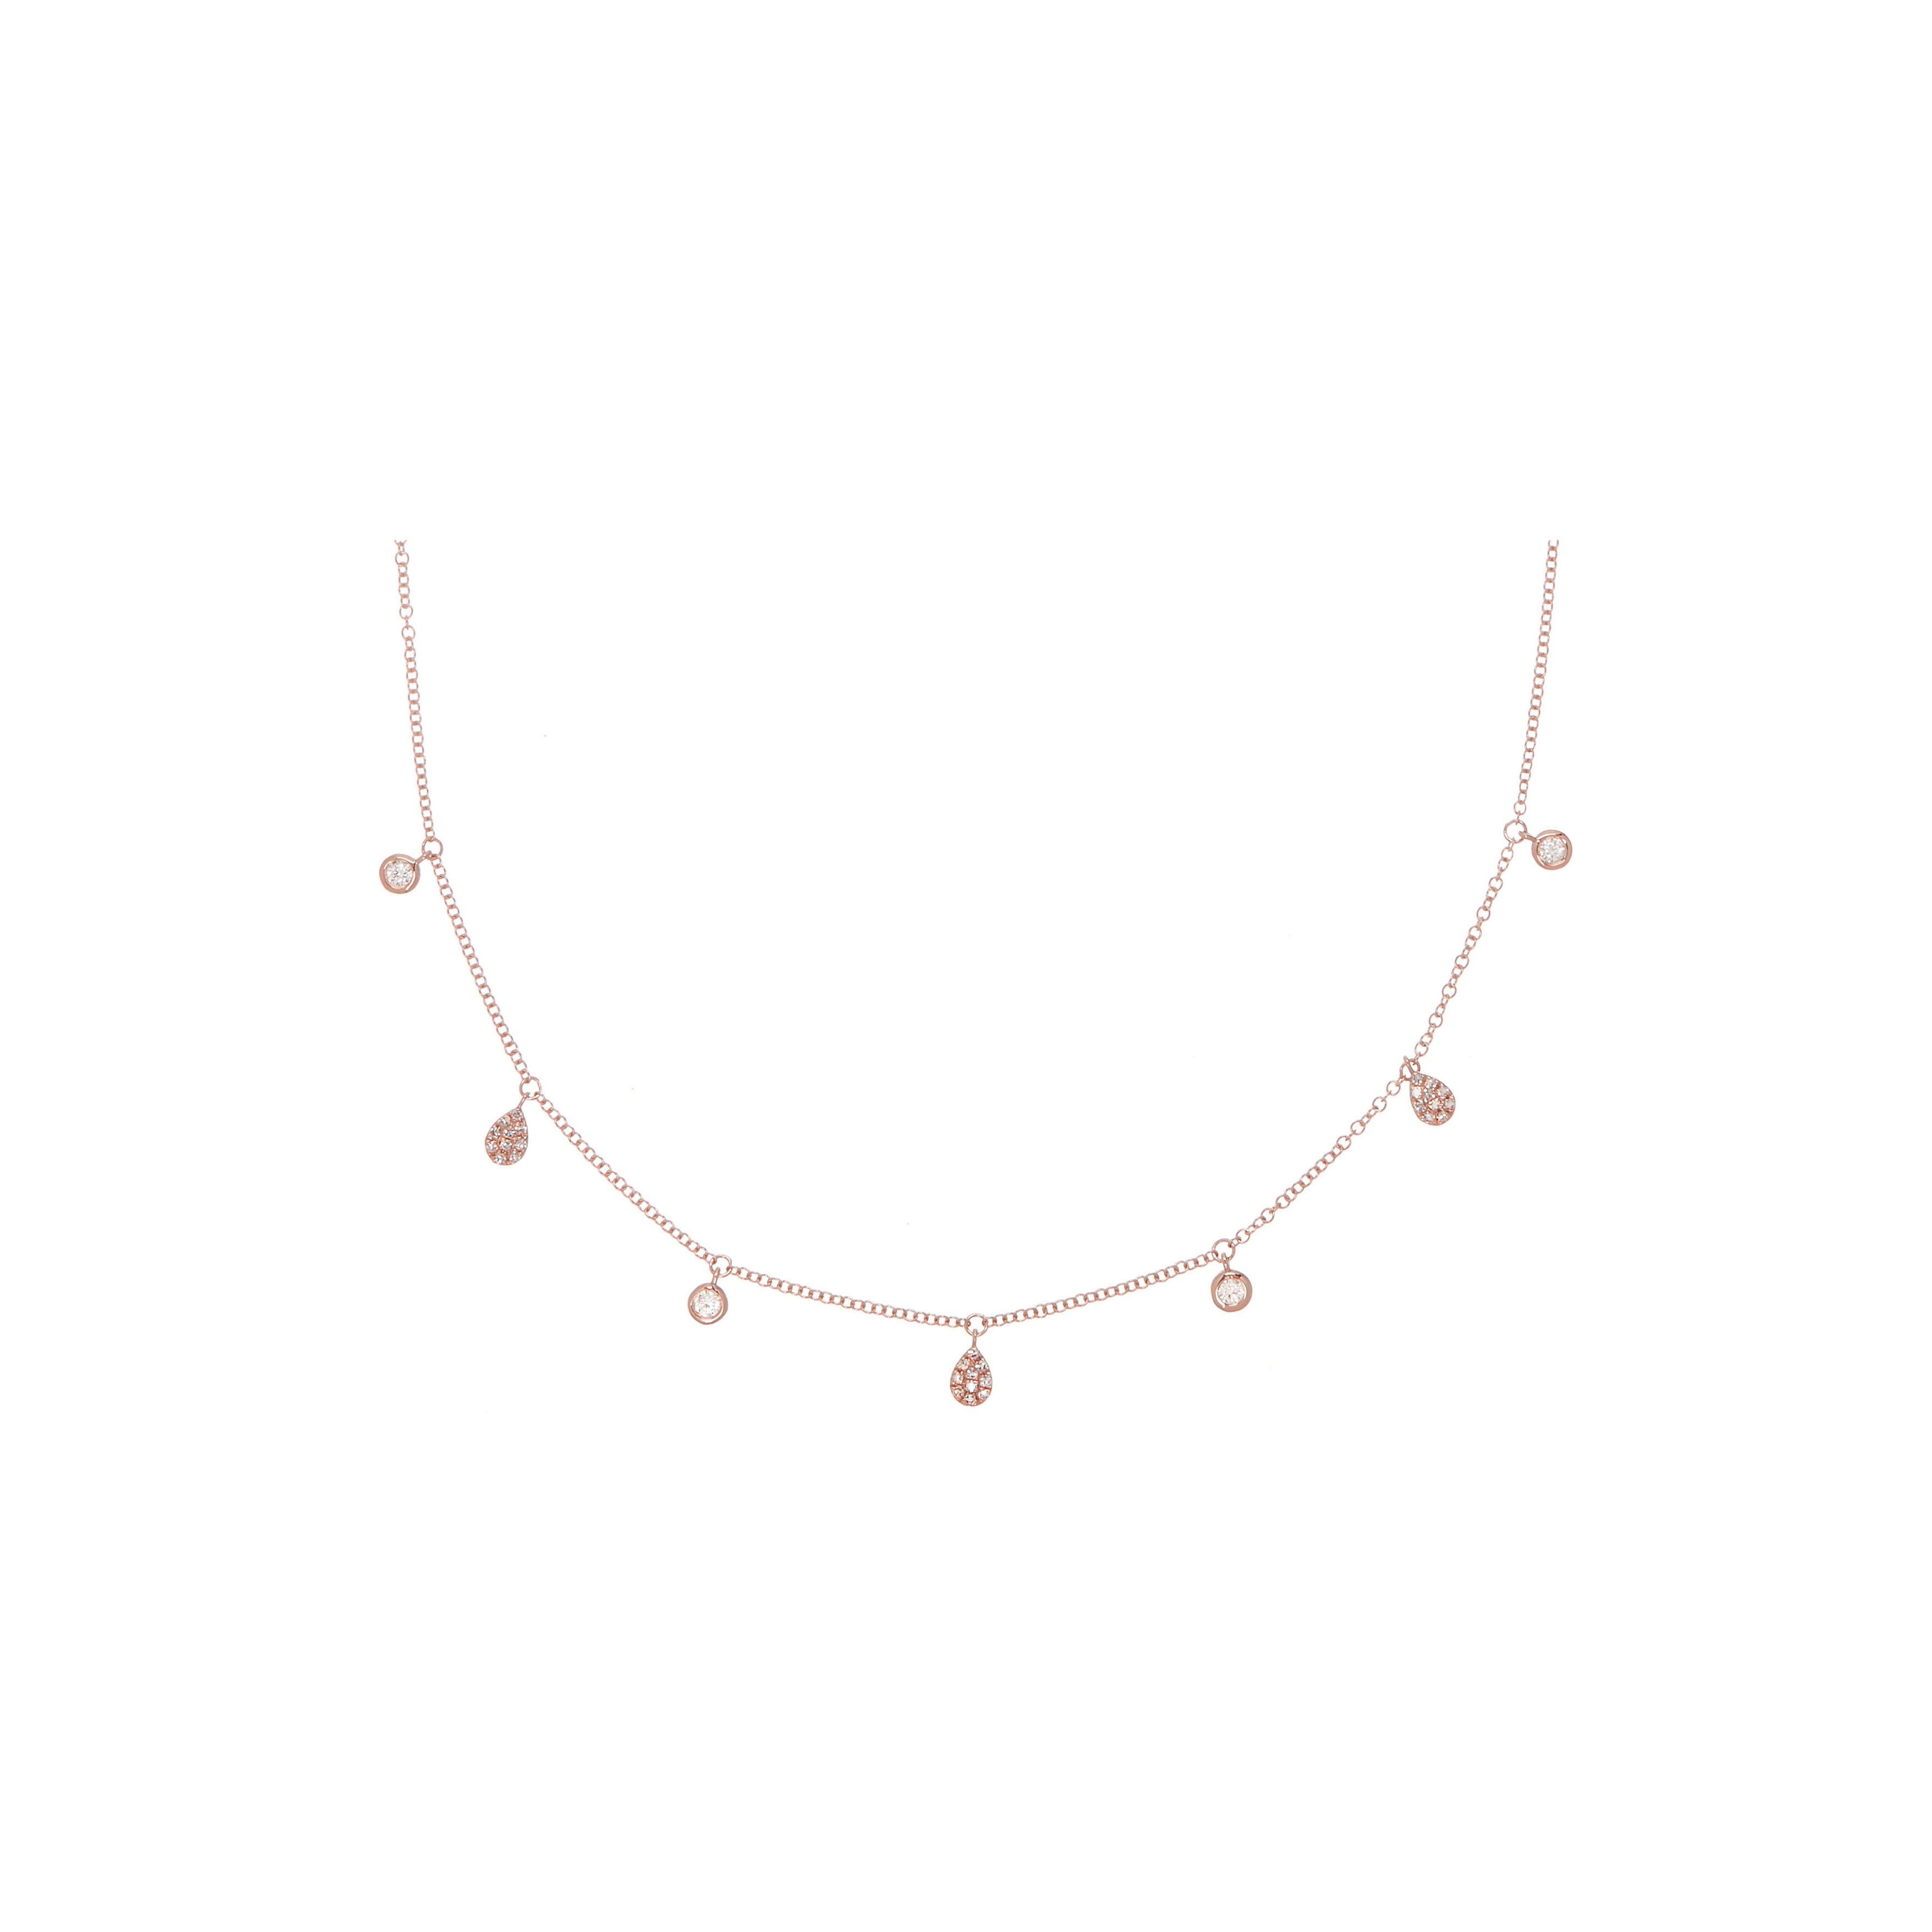 This Round Diamond and Pear-shape Pave Drop Chain Pendant is made in 14 karat Rose Gold, set with natural, colourless diamonds. With a total diamond carat weight (approximate) of 0.217 carat, The Diamonds are H colour, Si clarity. This pendant is